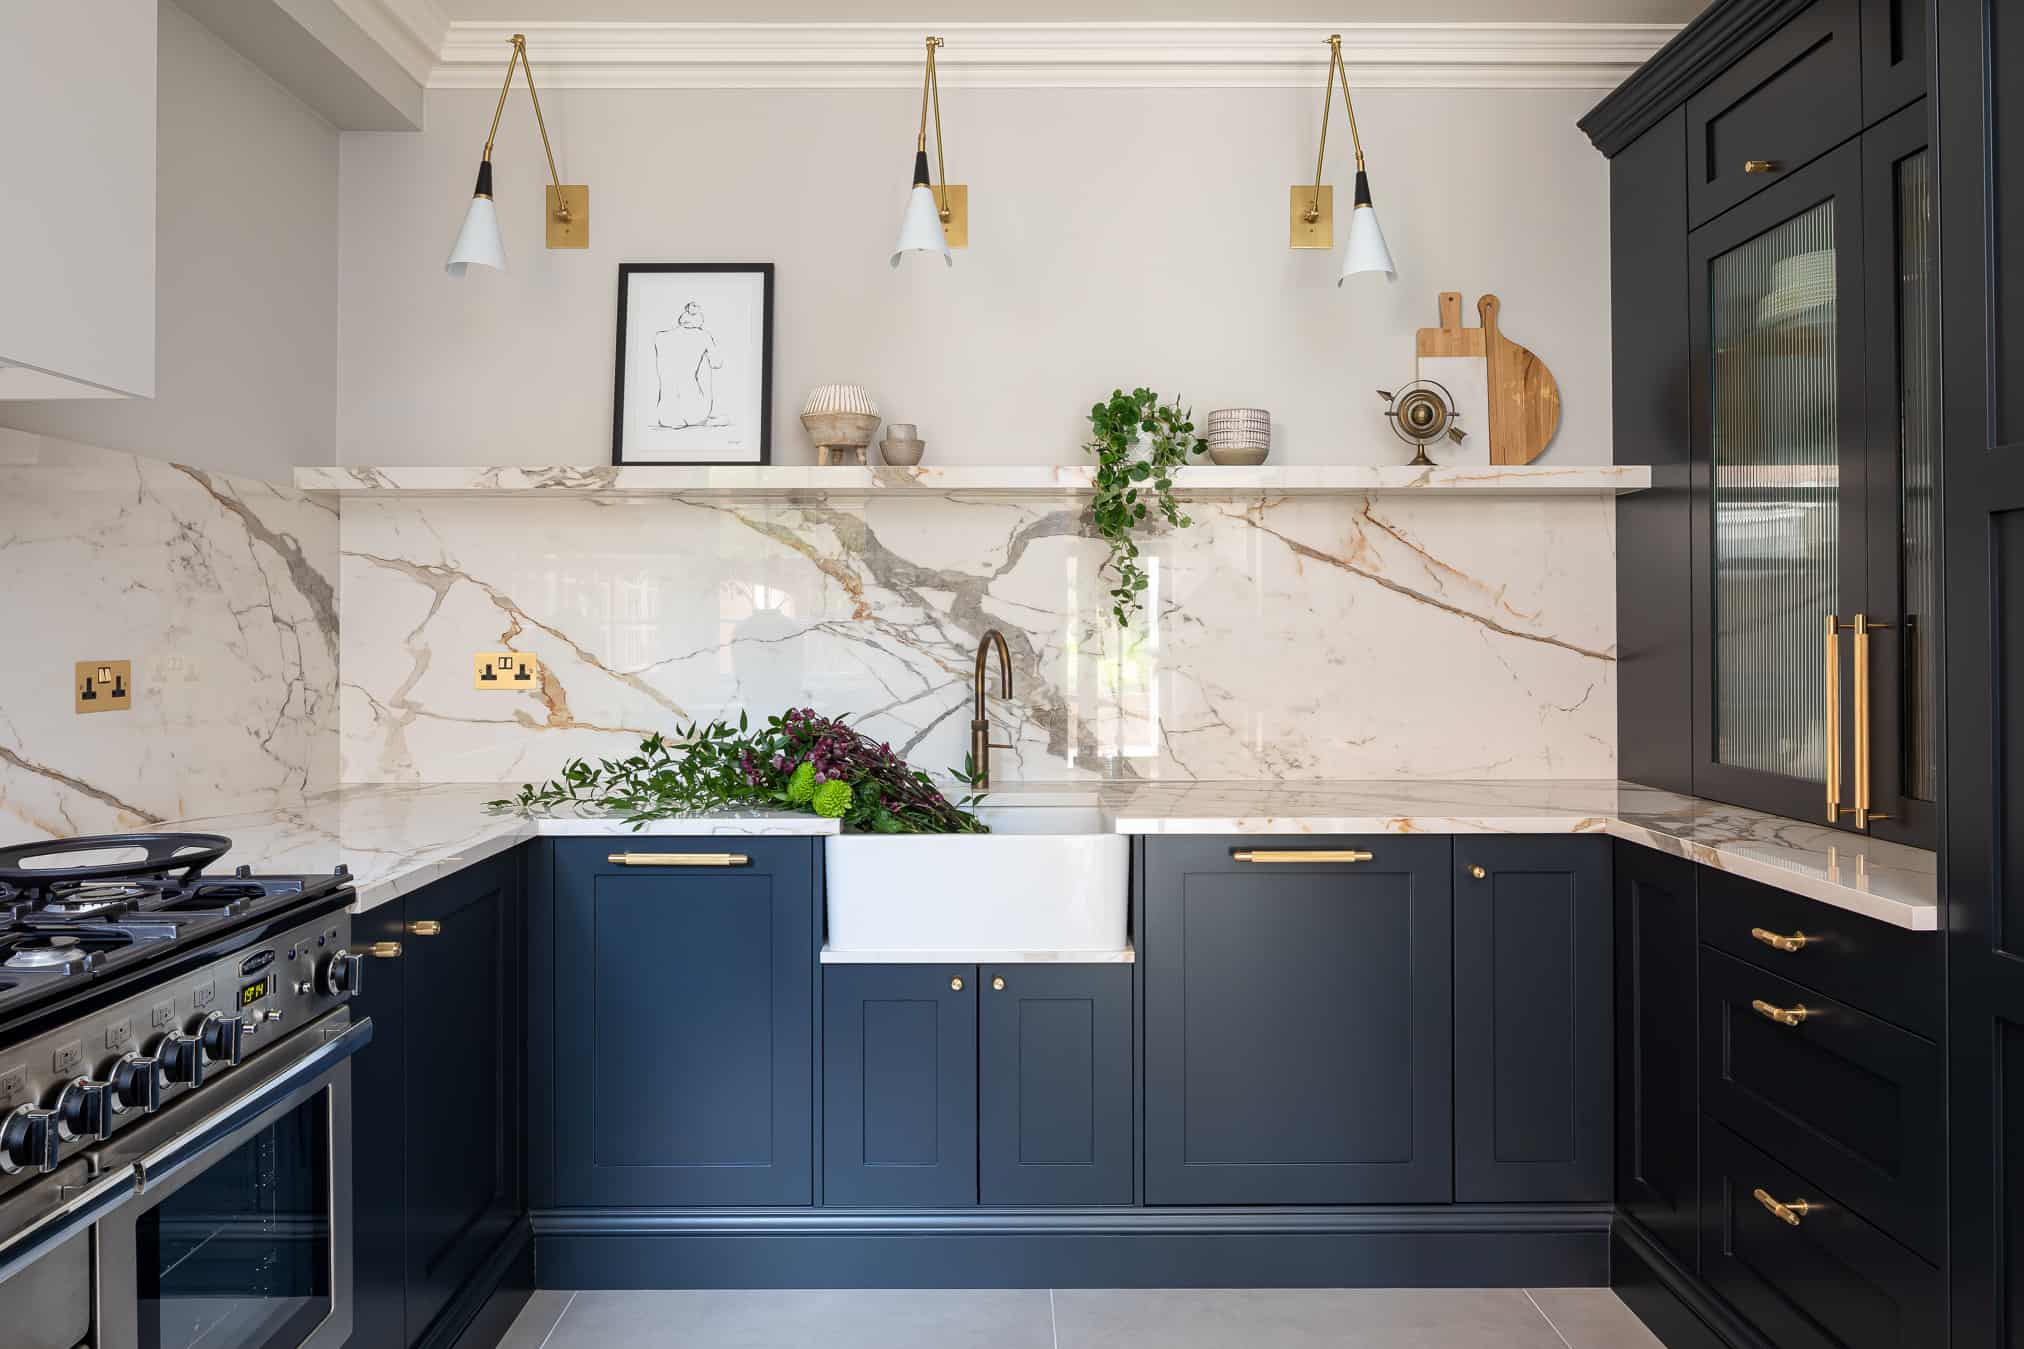 John Lewis of Hungerford luxury Shaker kitchen with blue cabinetry and gold handles with marble worktops and marble splashback